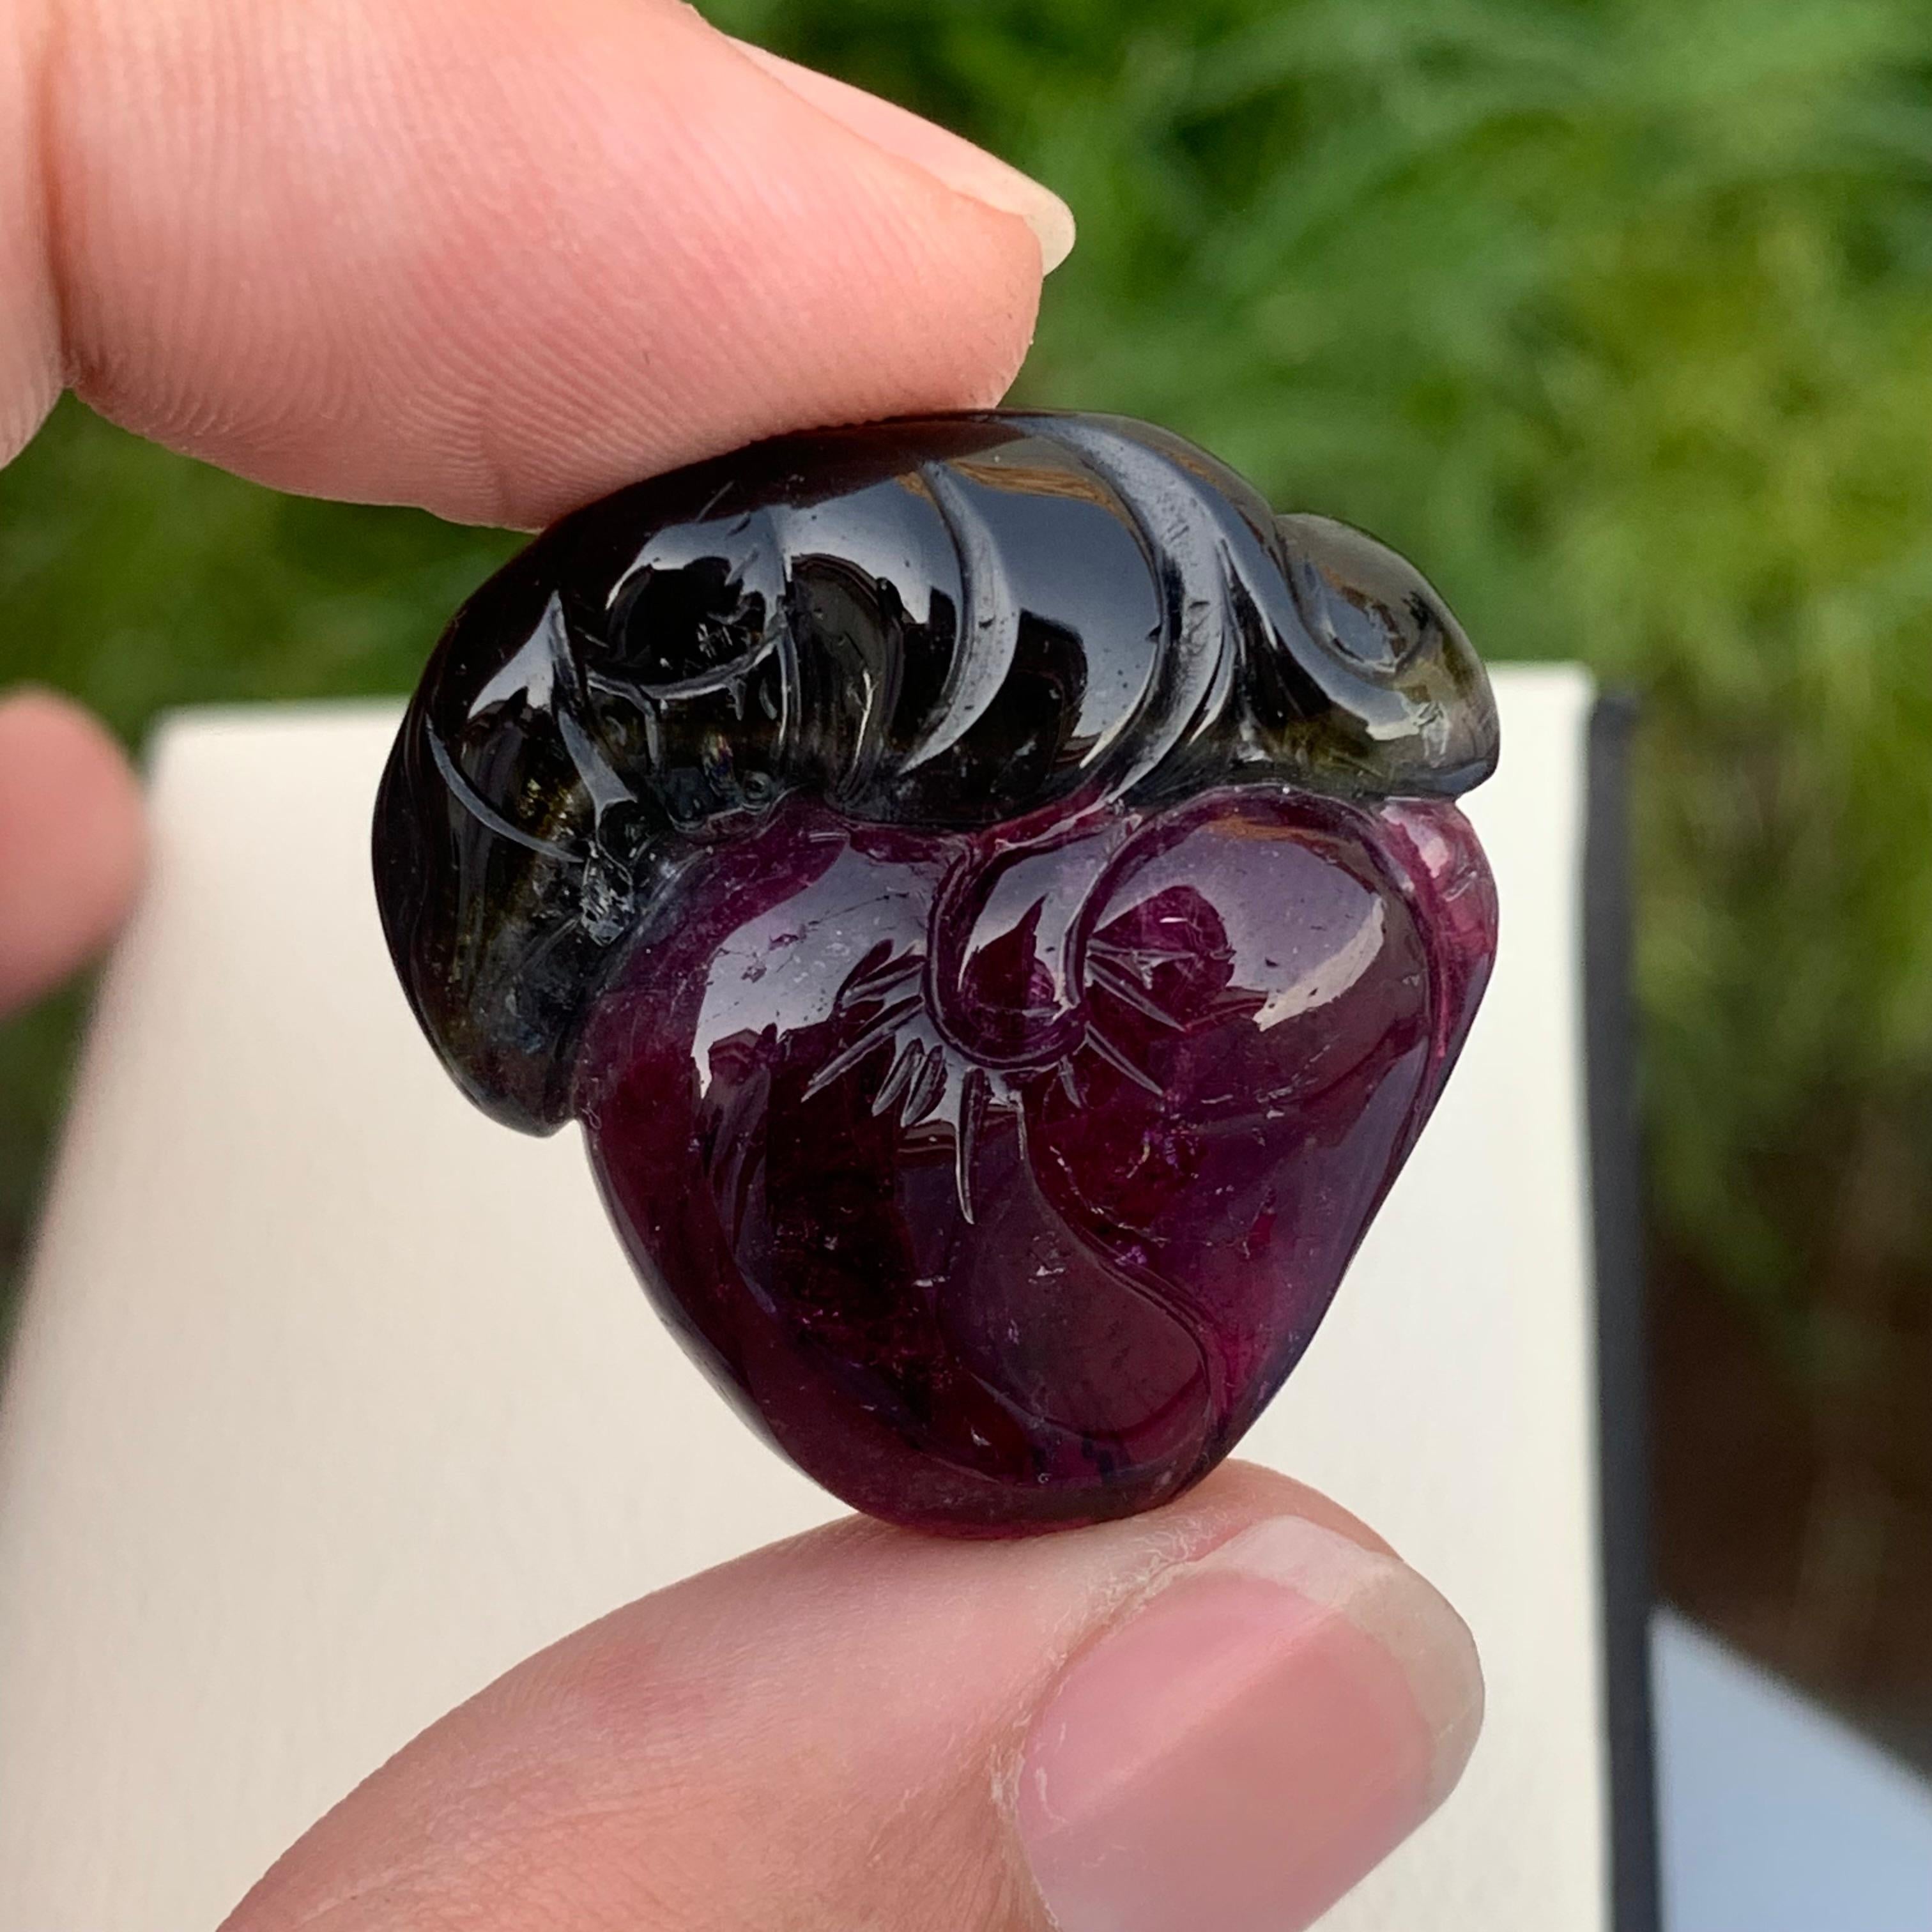 51.05 Carat Incredible Natural Loose Bicolor Tourmaline Carving from Africa For Sale 3